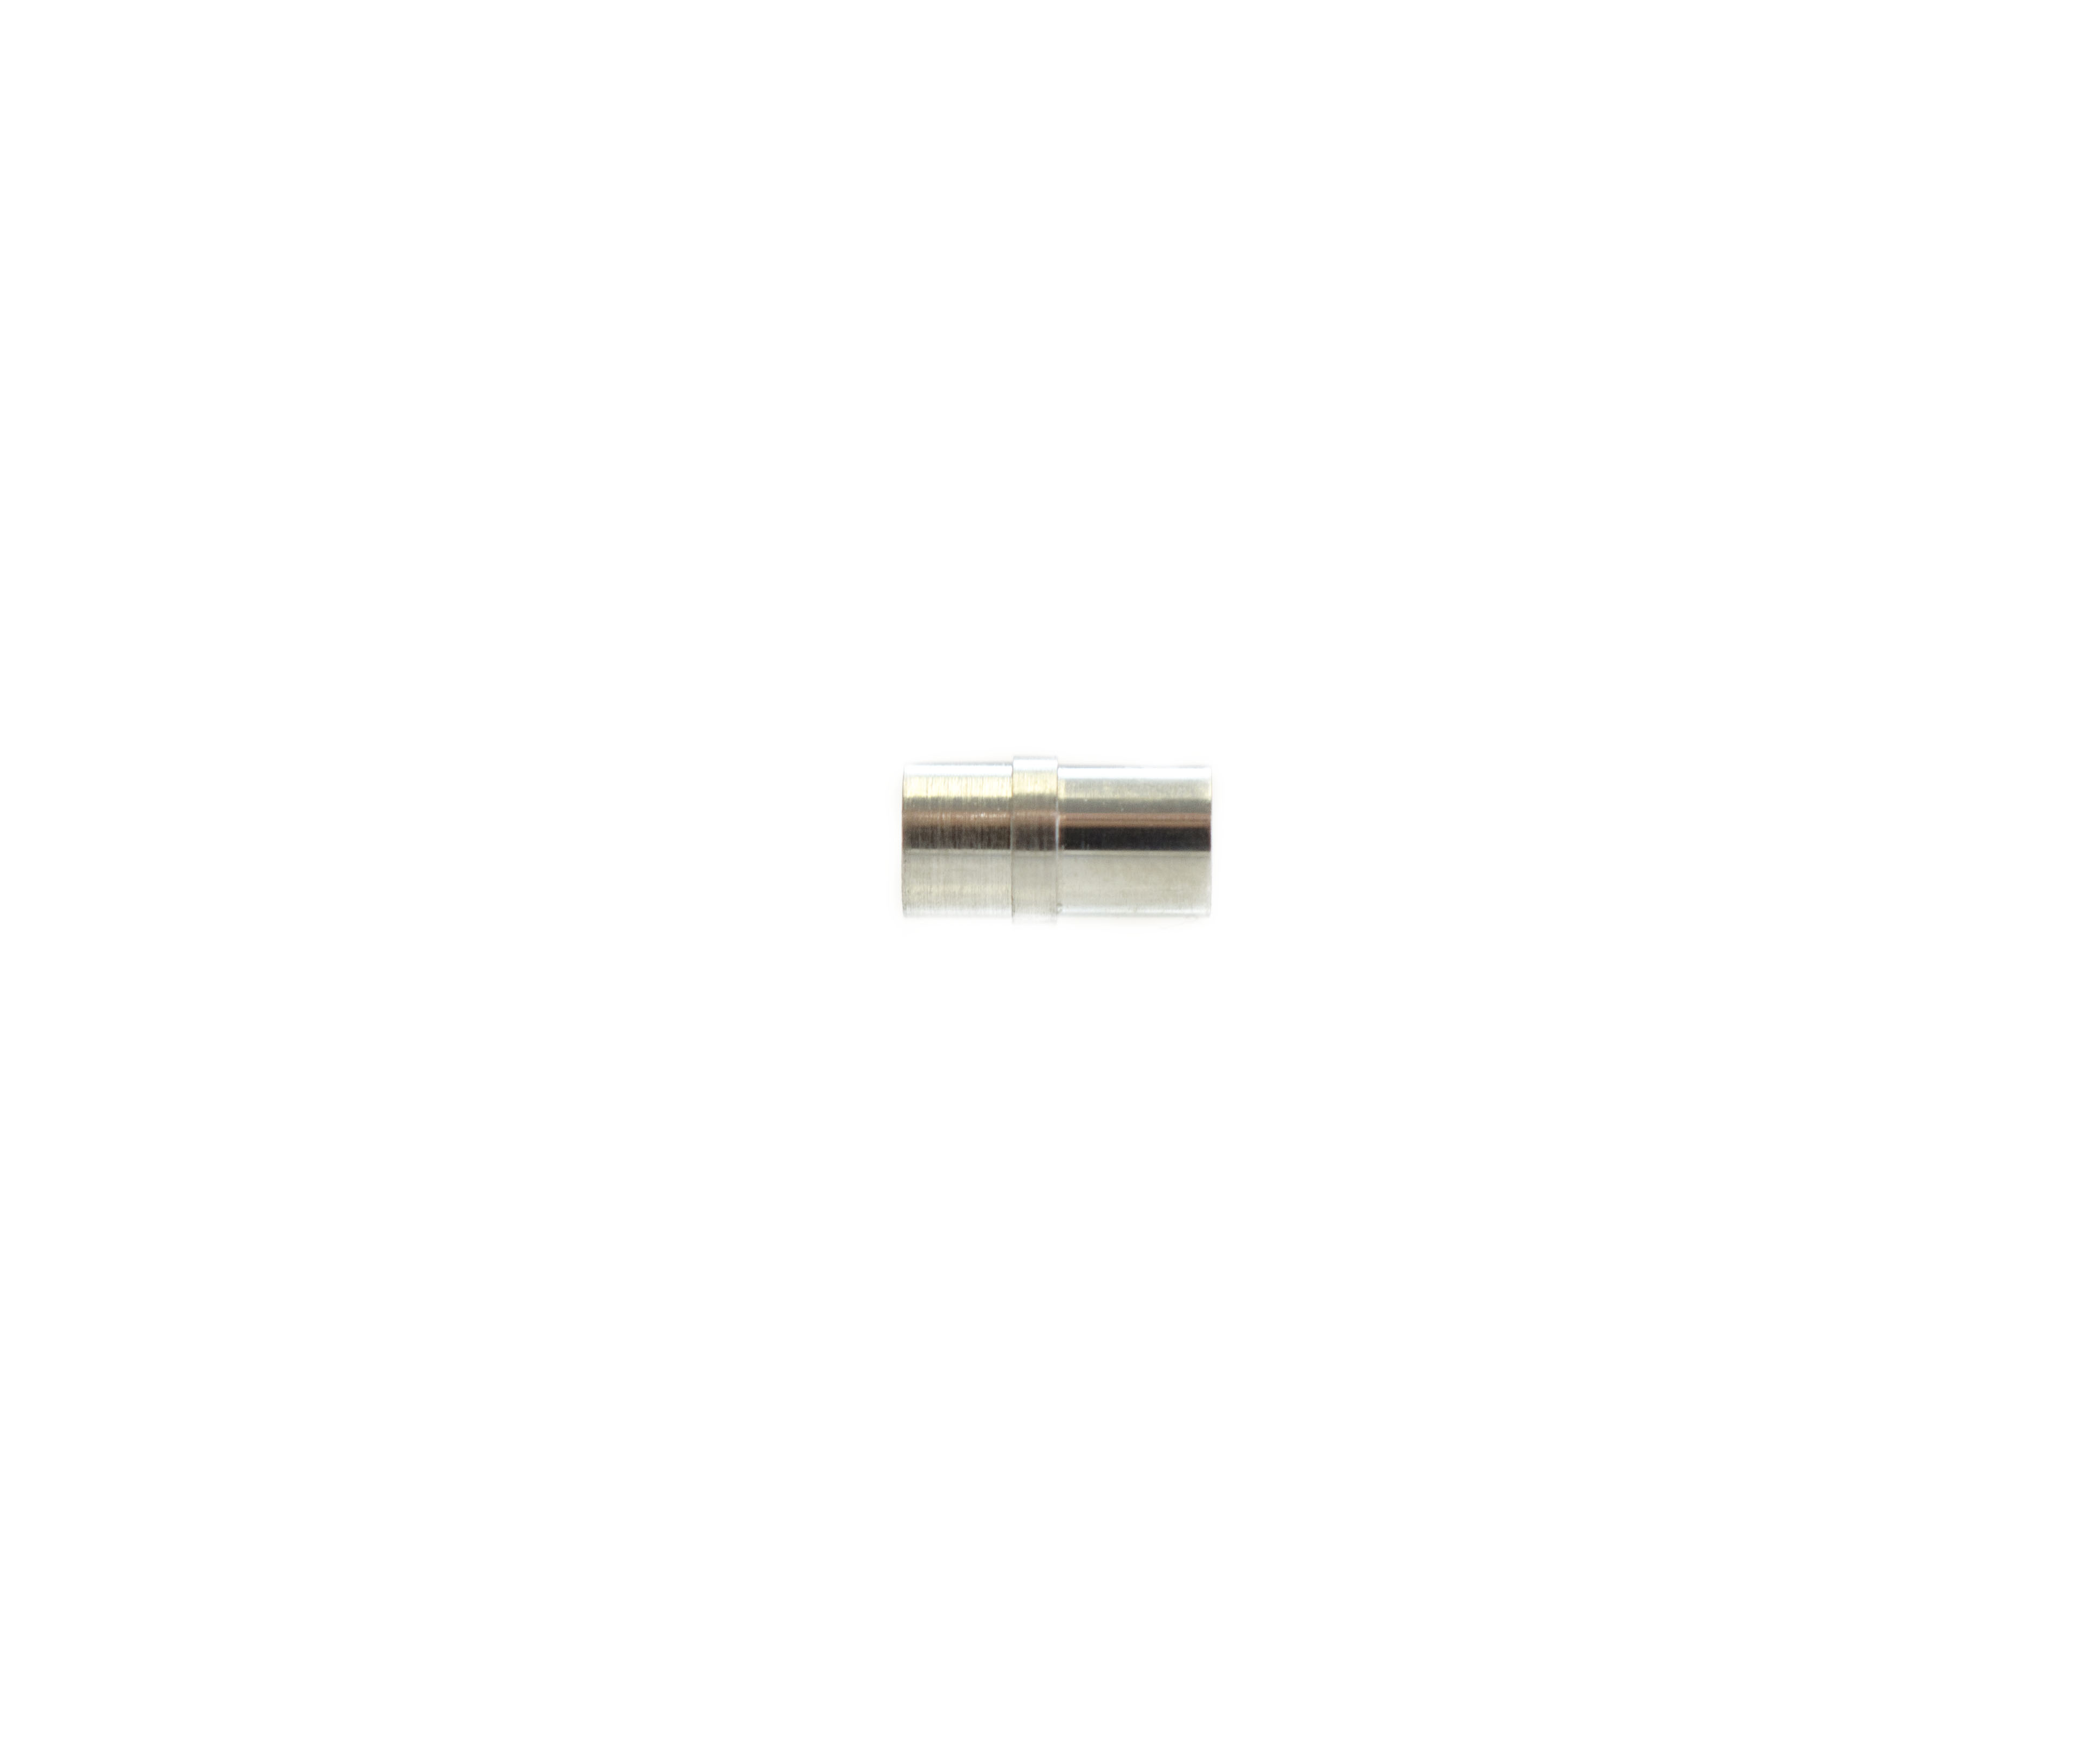 (OEM Compatible) Biopsy Channel Connector Sleeve (Insert) - BF-1T40 (2.80 mm)